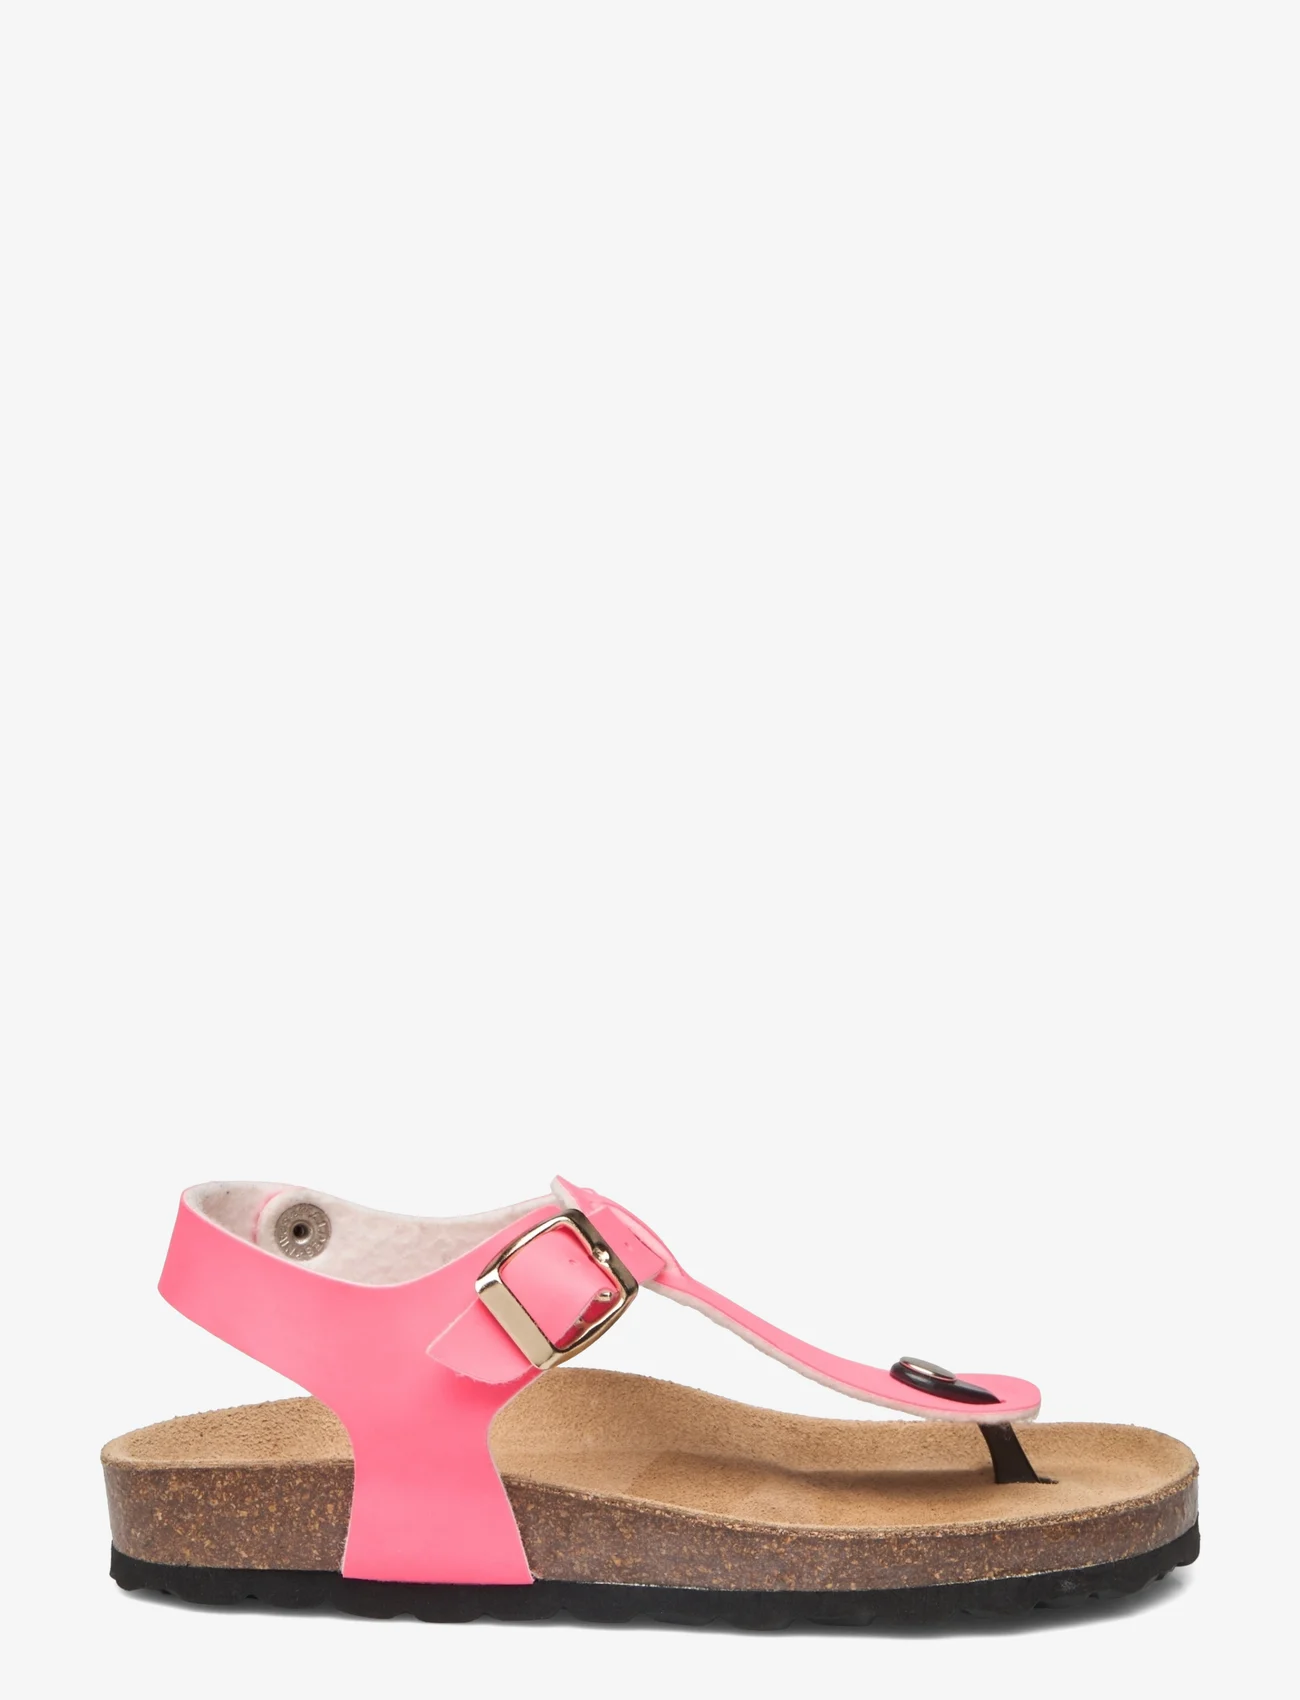 Sofie Schnoor Baby and Kids - Sandal lacquer - sandals - coral pink - 1